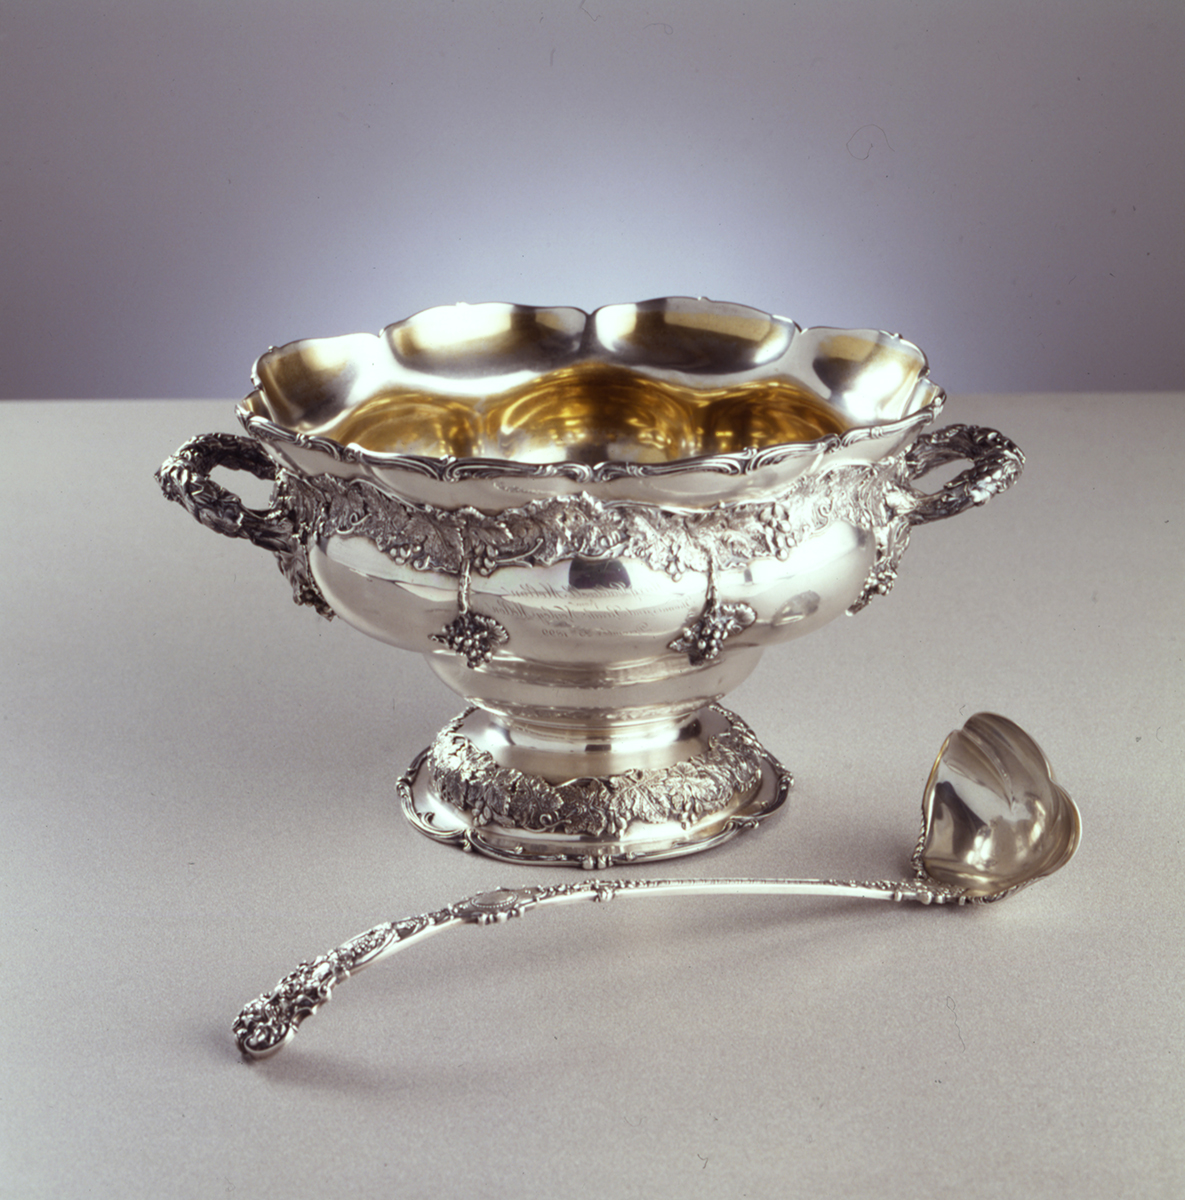 Mellon punch bowl and ladle, 1899. Gift of Mr. and Mrs. Samuel McClung.